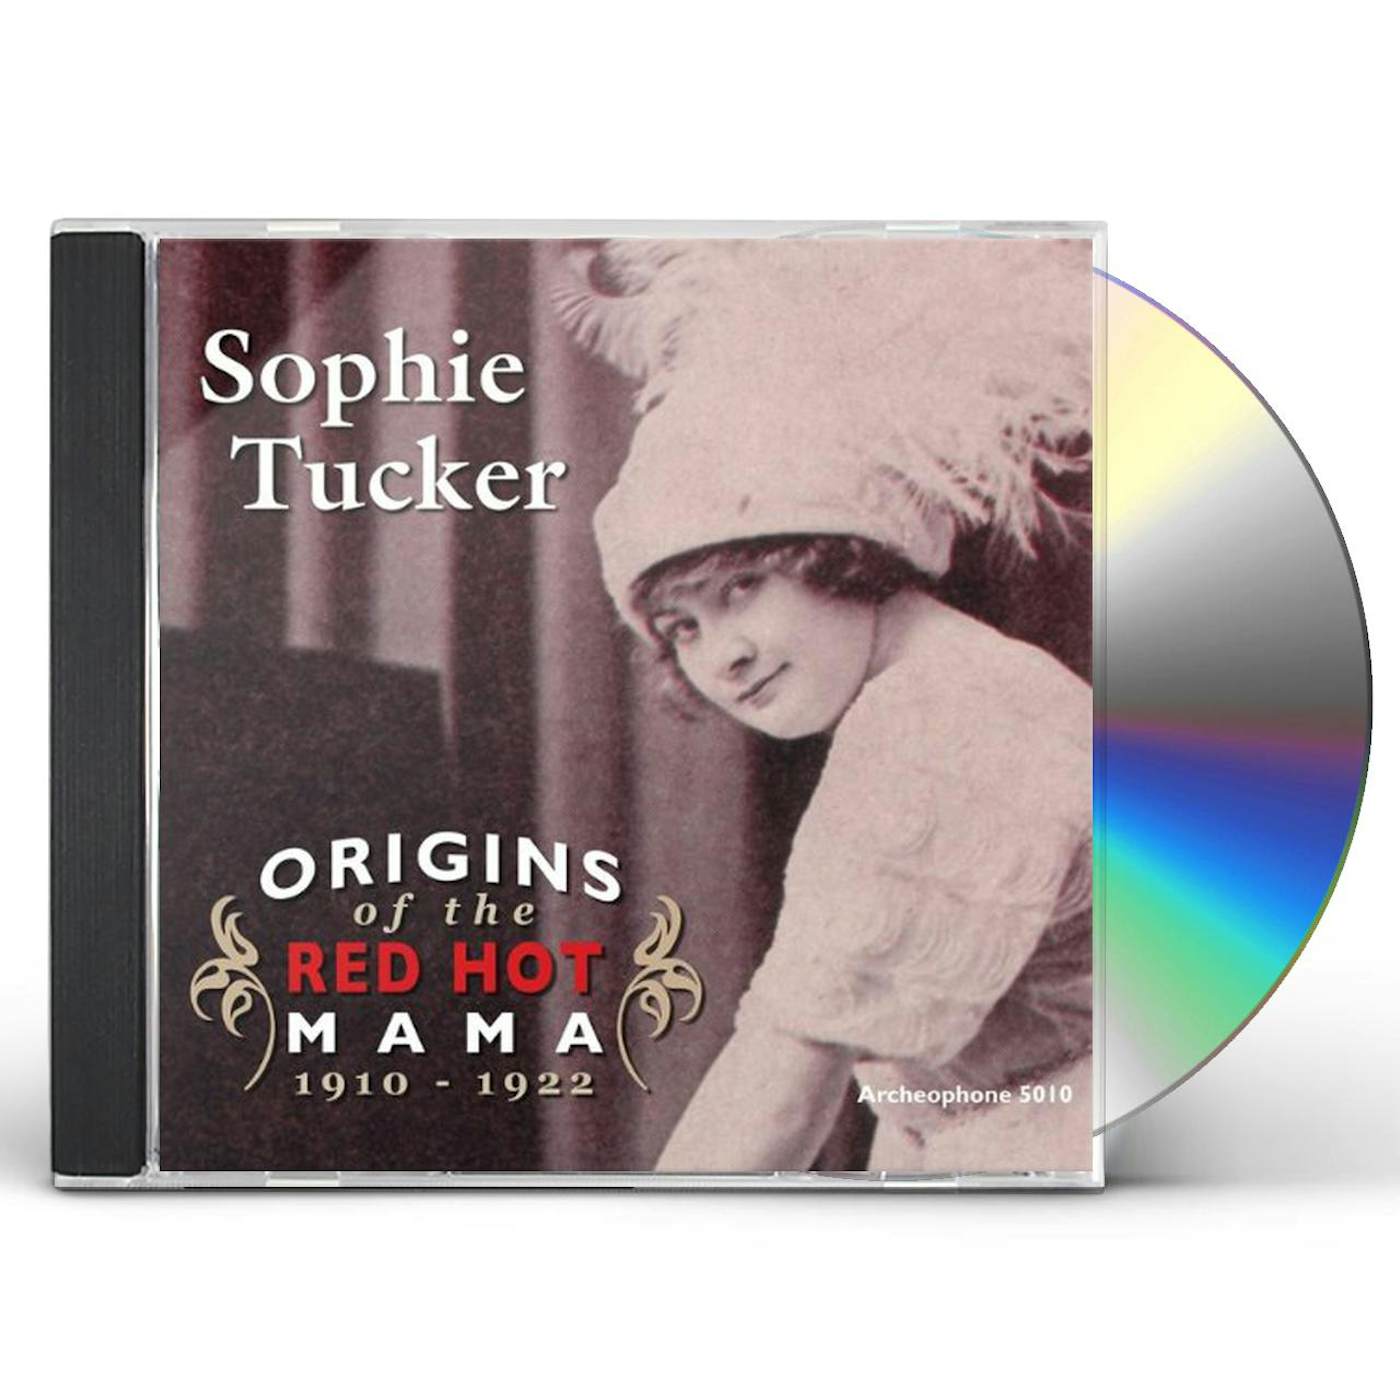 Sophie Tucker ORIGINS OF THE RED HOT MAMA CD